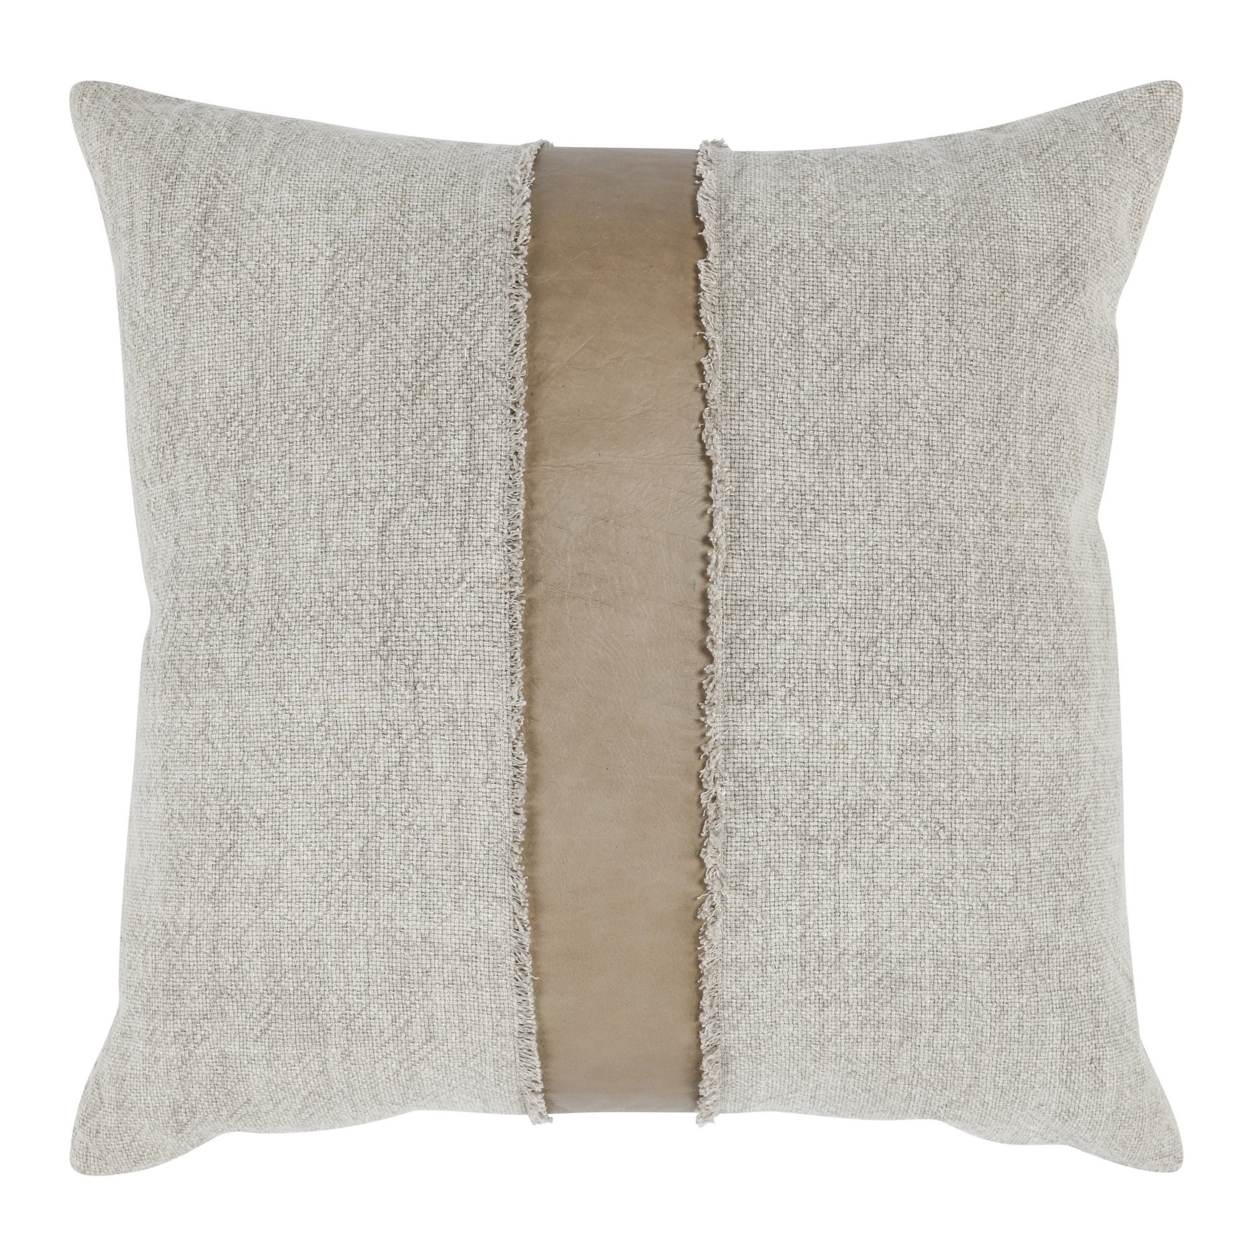 26 X 26 Throw Pillow, Pieced Fabric, Cotton, Leather, Frayed Fringes, Gray- Saltoro Sherpi